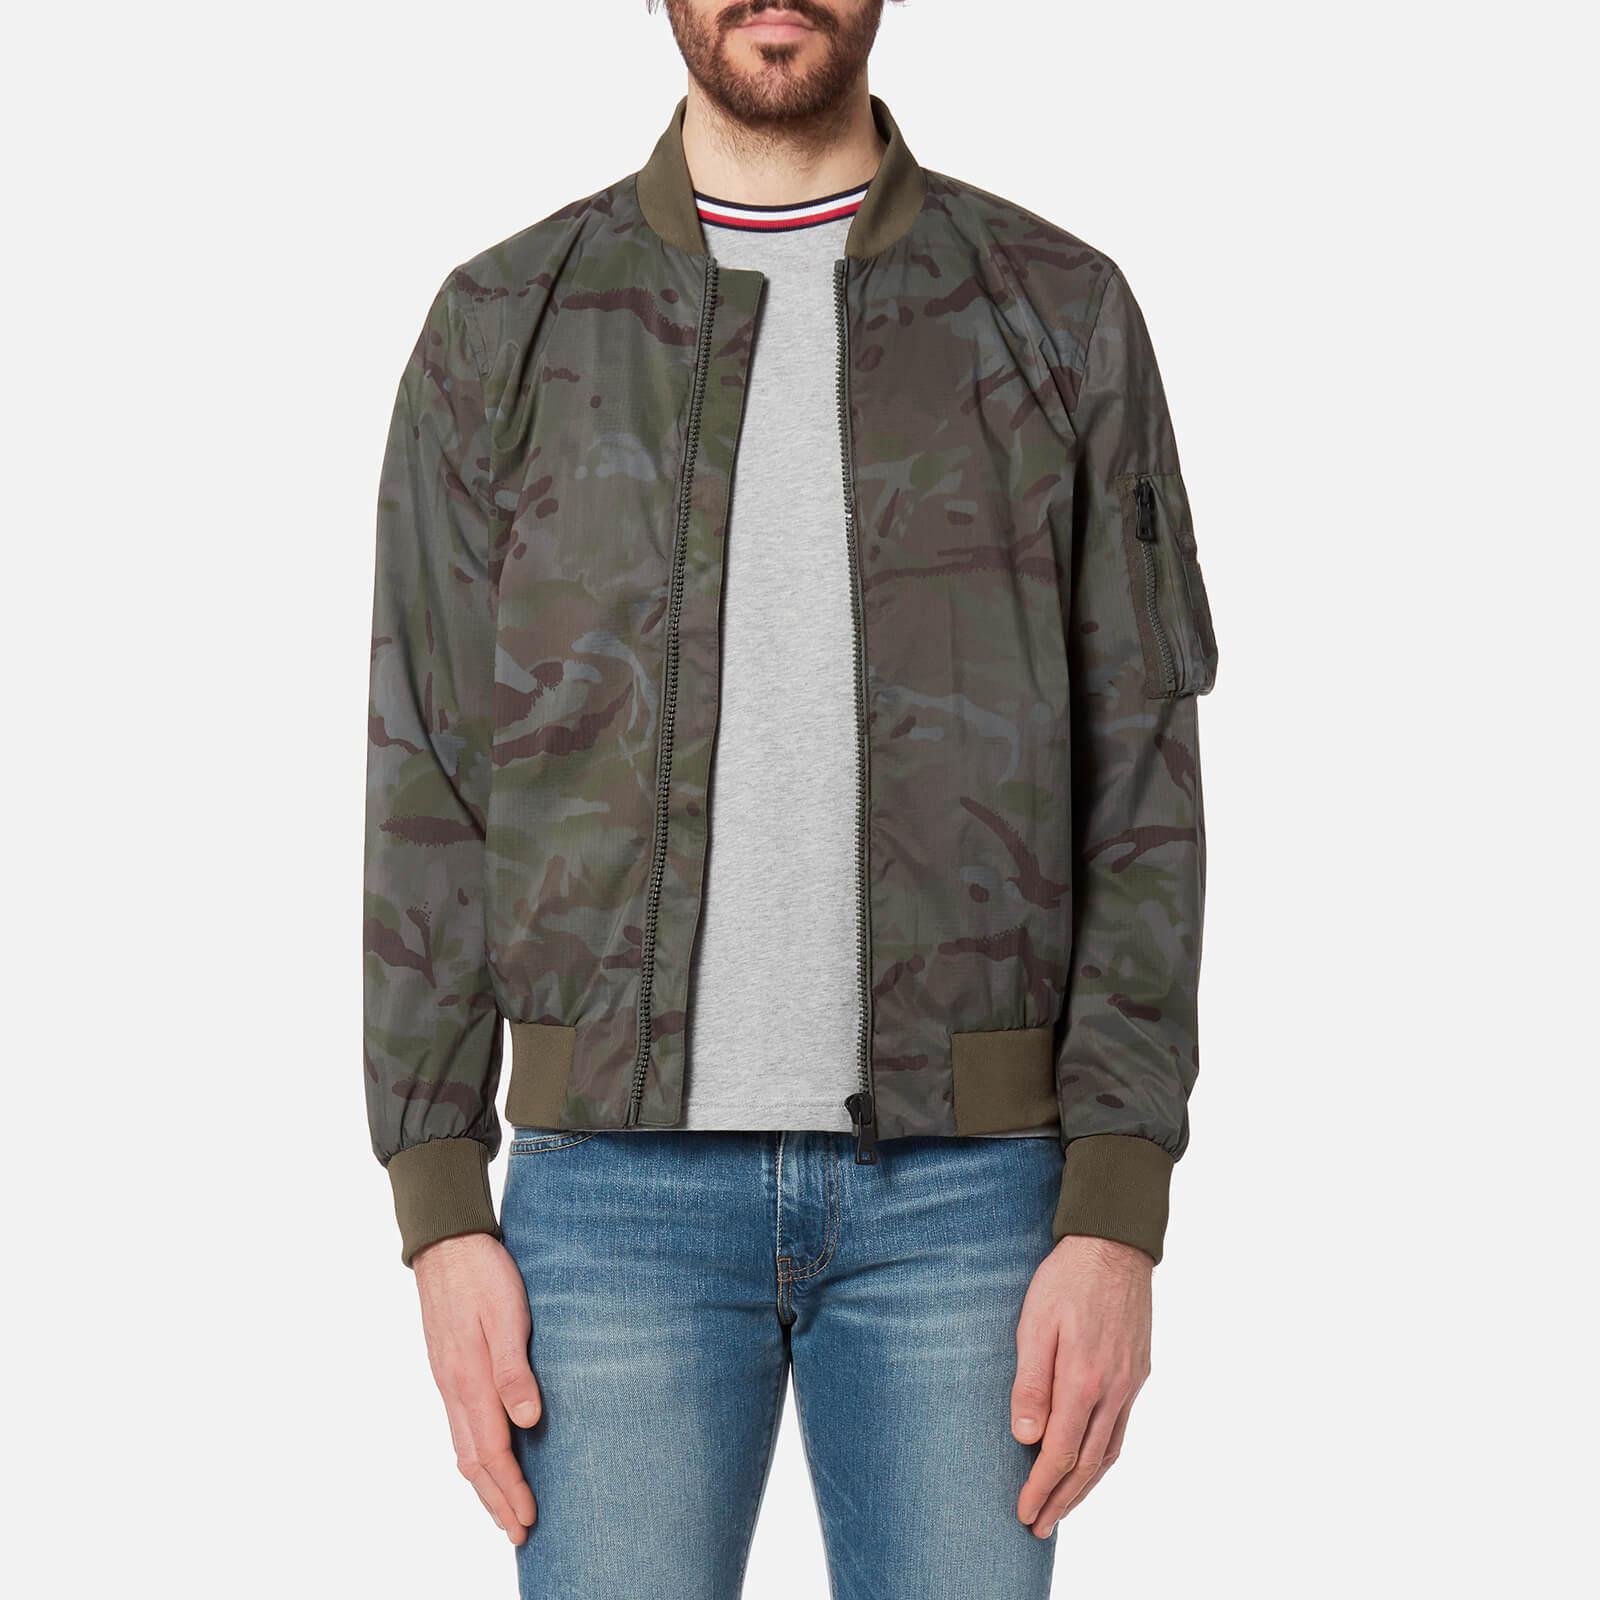 Tommy Hilfiger Synthetic Camo Bomber Jacket in Green for Men - Lyst